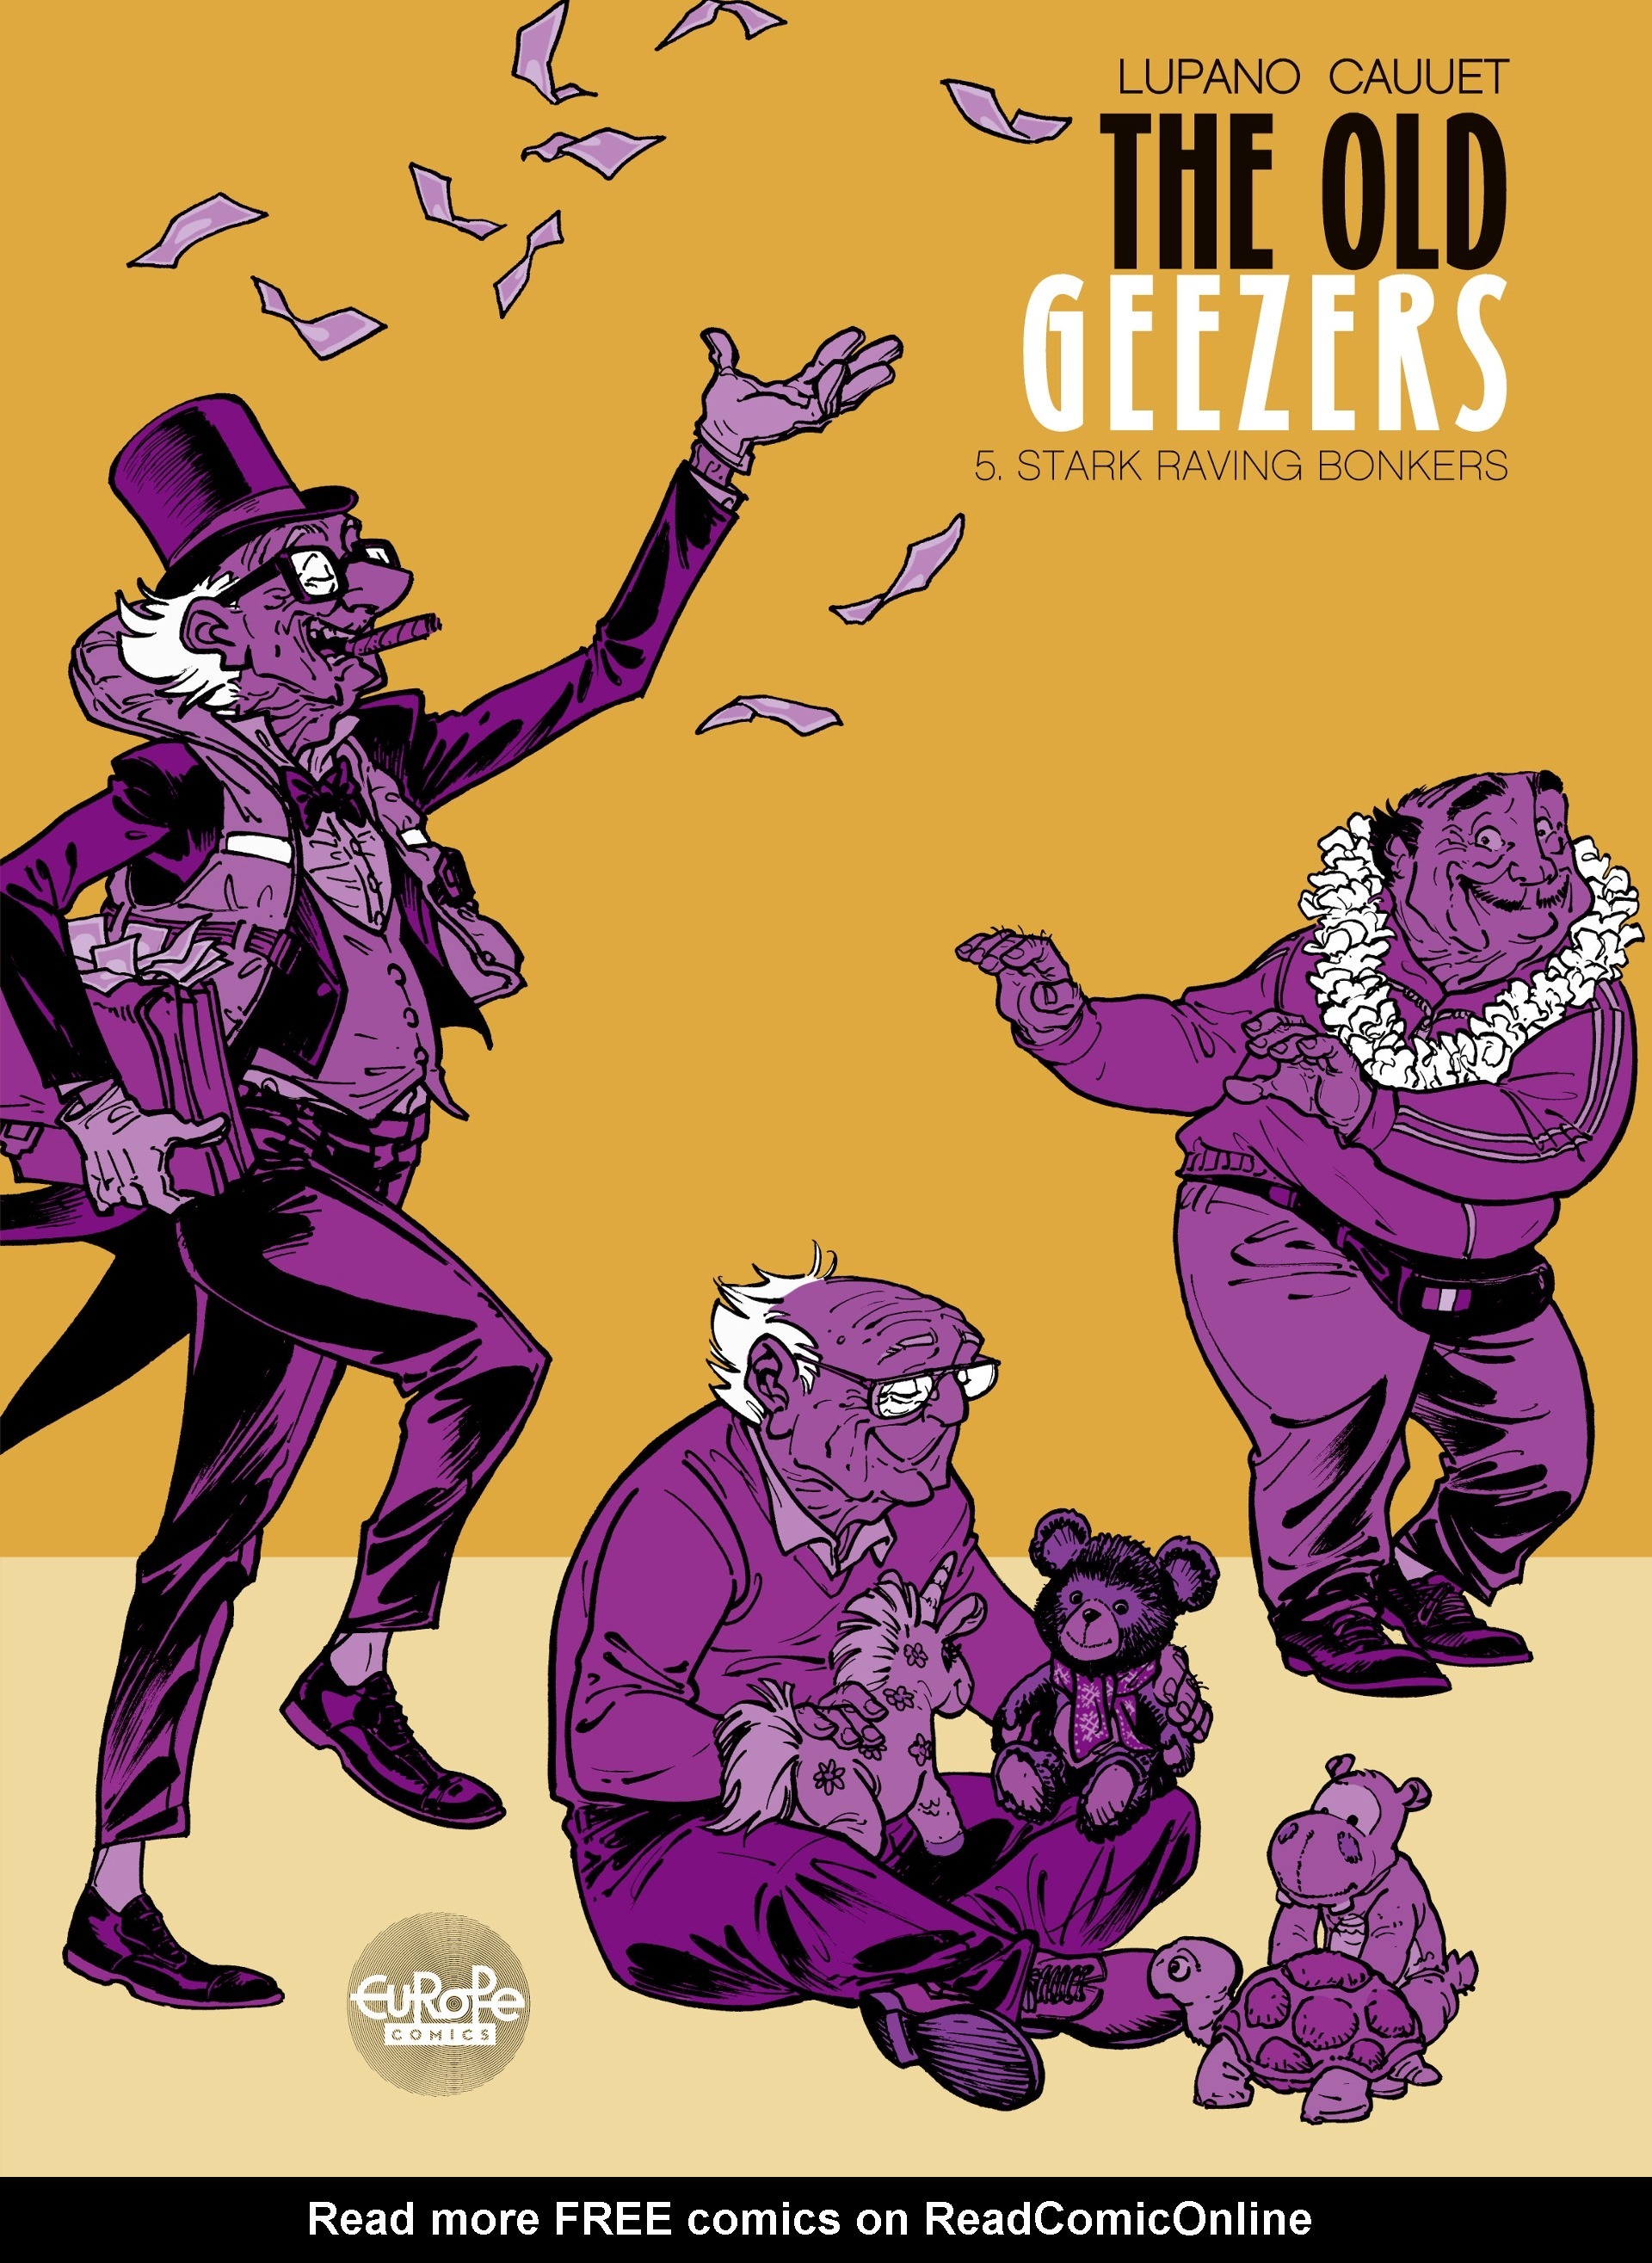 Old Geezers Of The Park The Old Geezers Issue 5 | Read The Old Geezers Issue 5 comic online in high  quality. Read Full Comic online for free - Read comics online in high  quality .